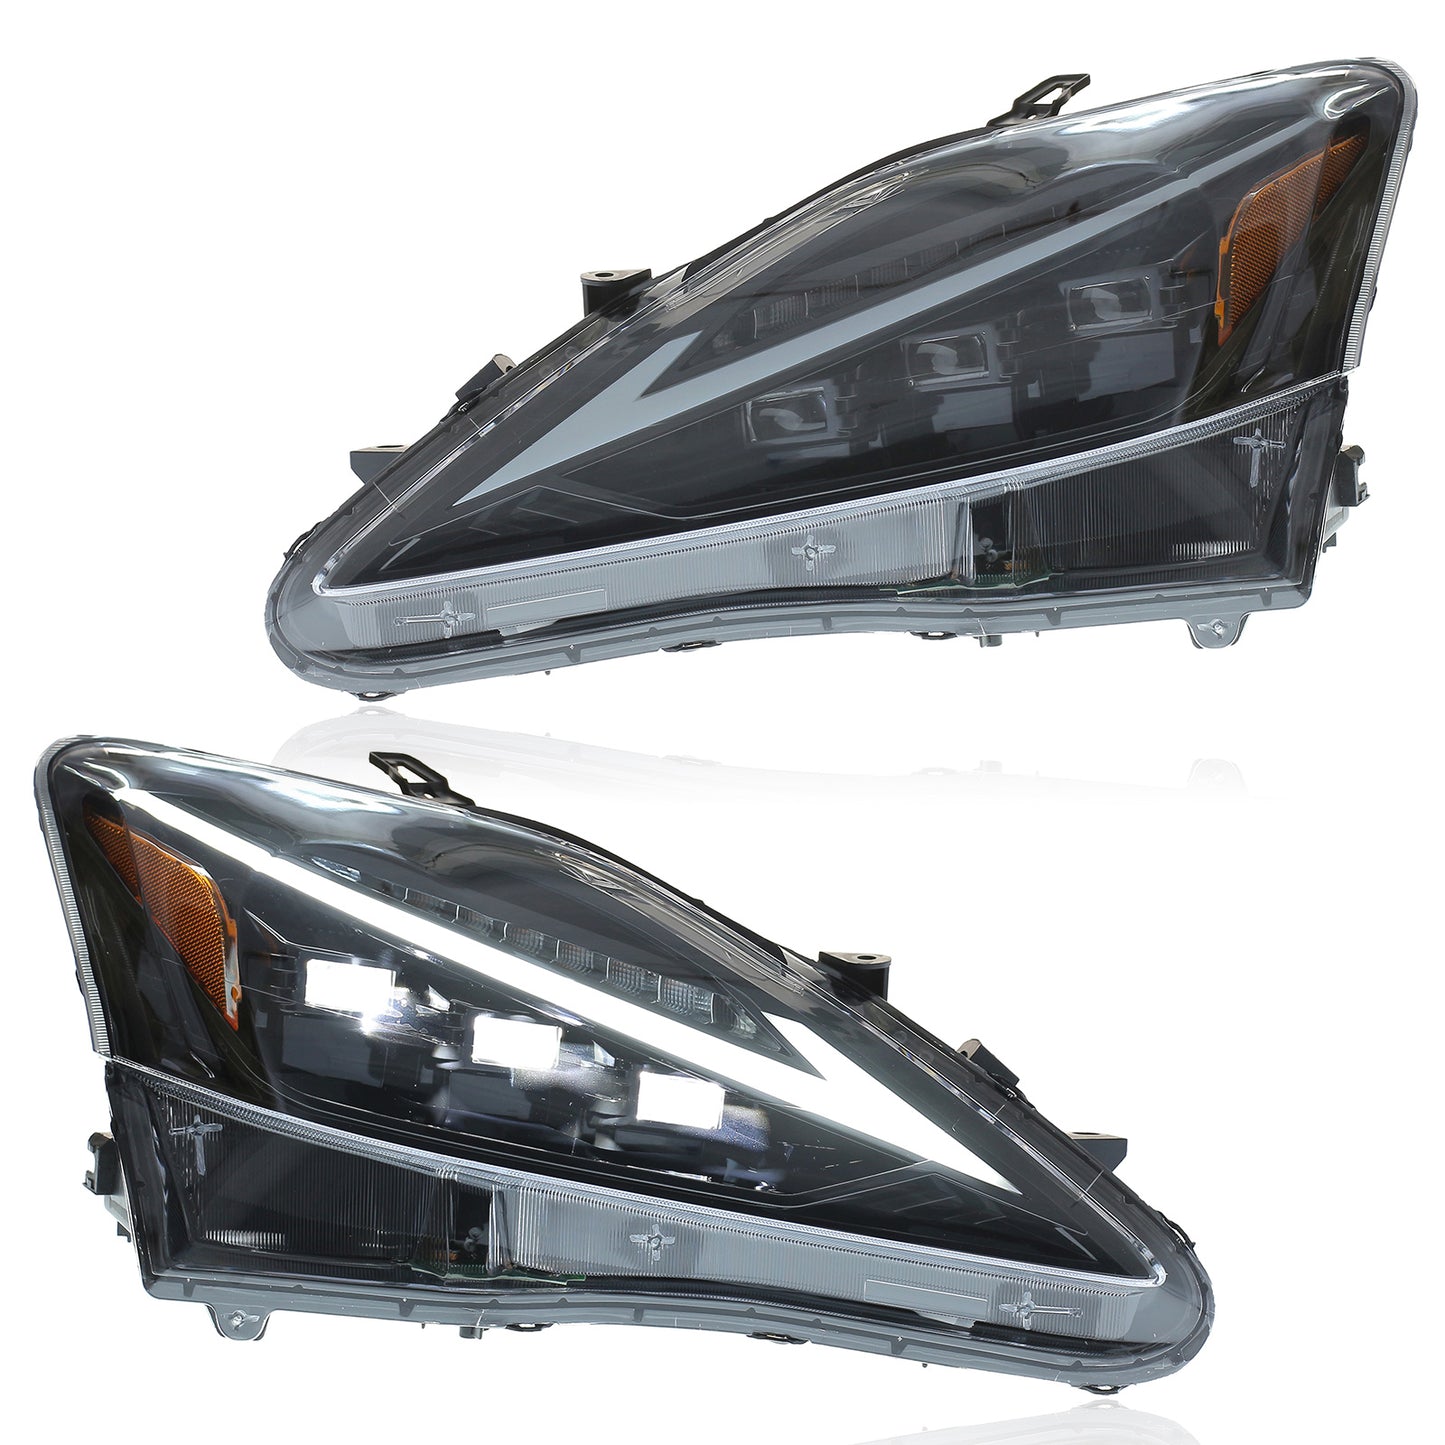 JOLUNG Full LED Headlights Assembly For LEXUS IS250/ IS250C/ IS300/ IS350/ ISF 2006-2012 (Amber)